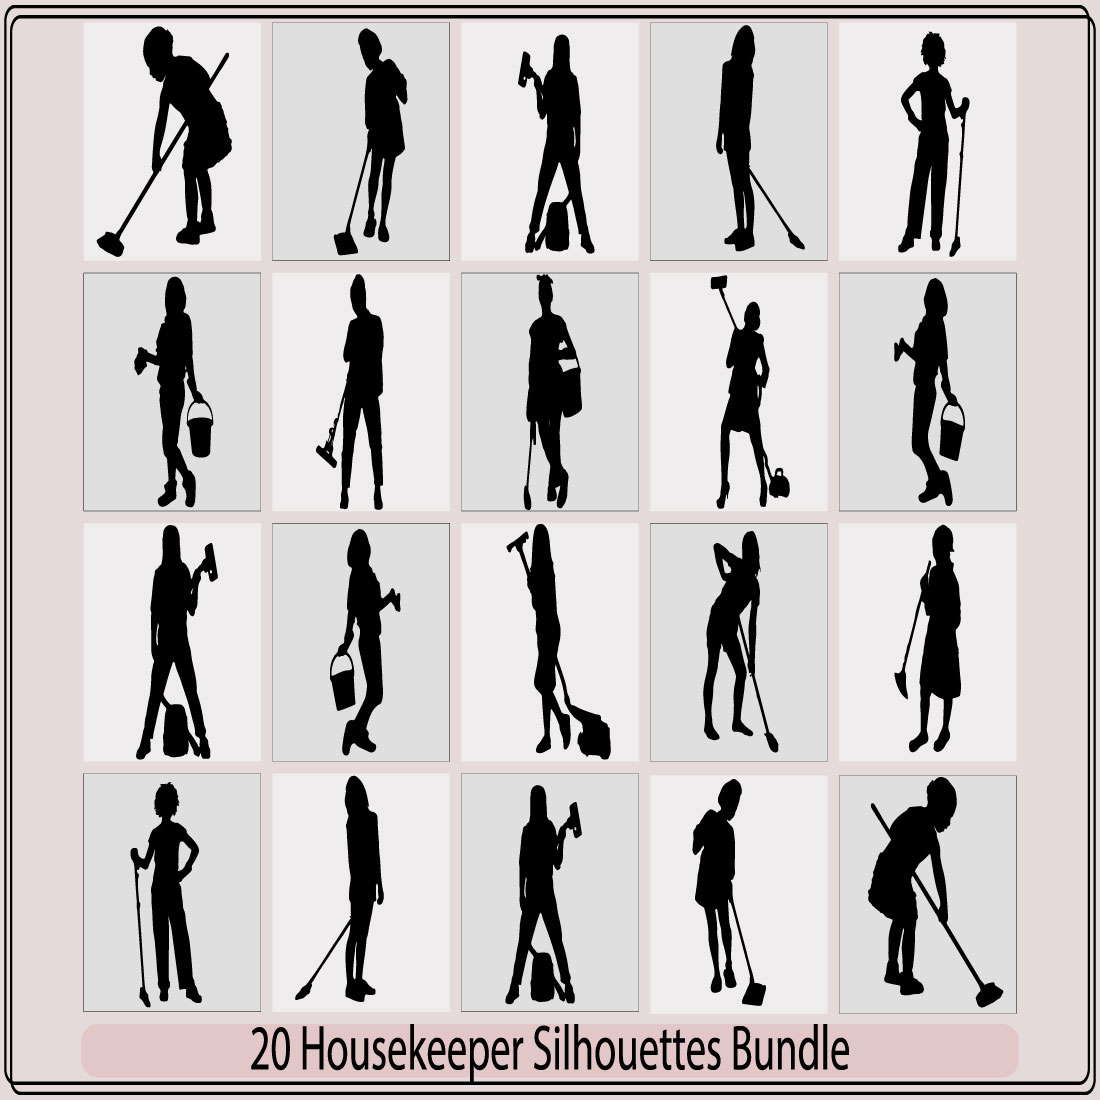 Silhouette of female cleaner,cleaning maid silhouette vector illustration  Housemaid,Maid Silhouette, Woman Housekeeper, House Cleaning Service  illustration Vector - MasterBundles